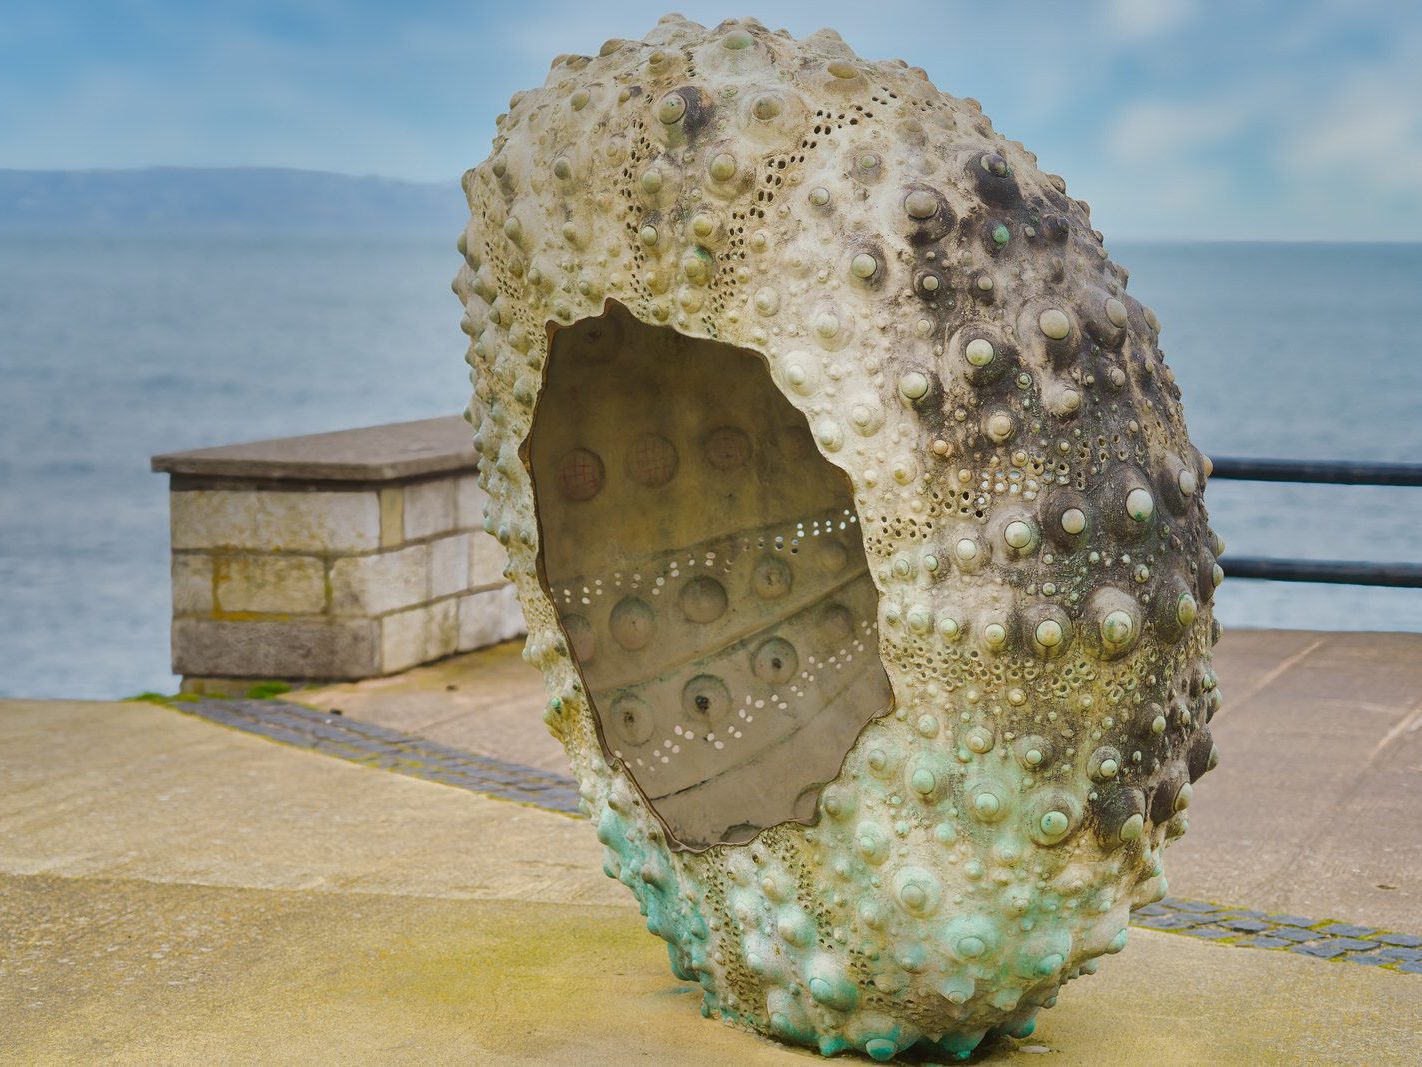 I REALLY LIKE THIS SCULPTURE BY RACHEL JOTNT [NEWTOWNSMITH IN SANDYCOVE] 005